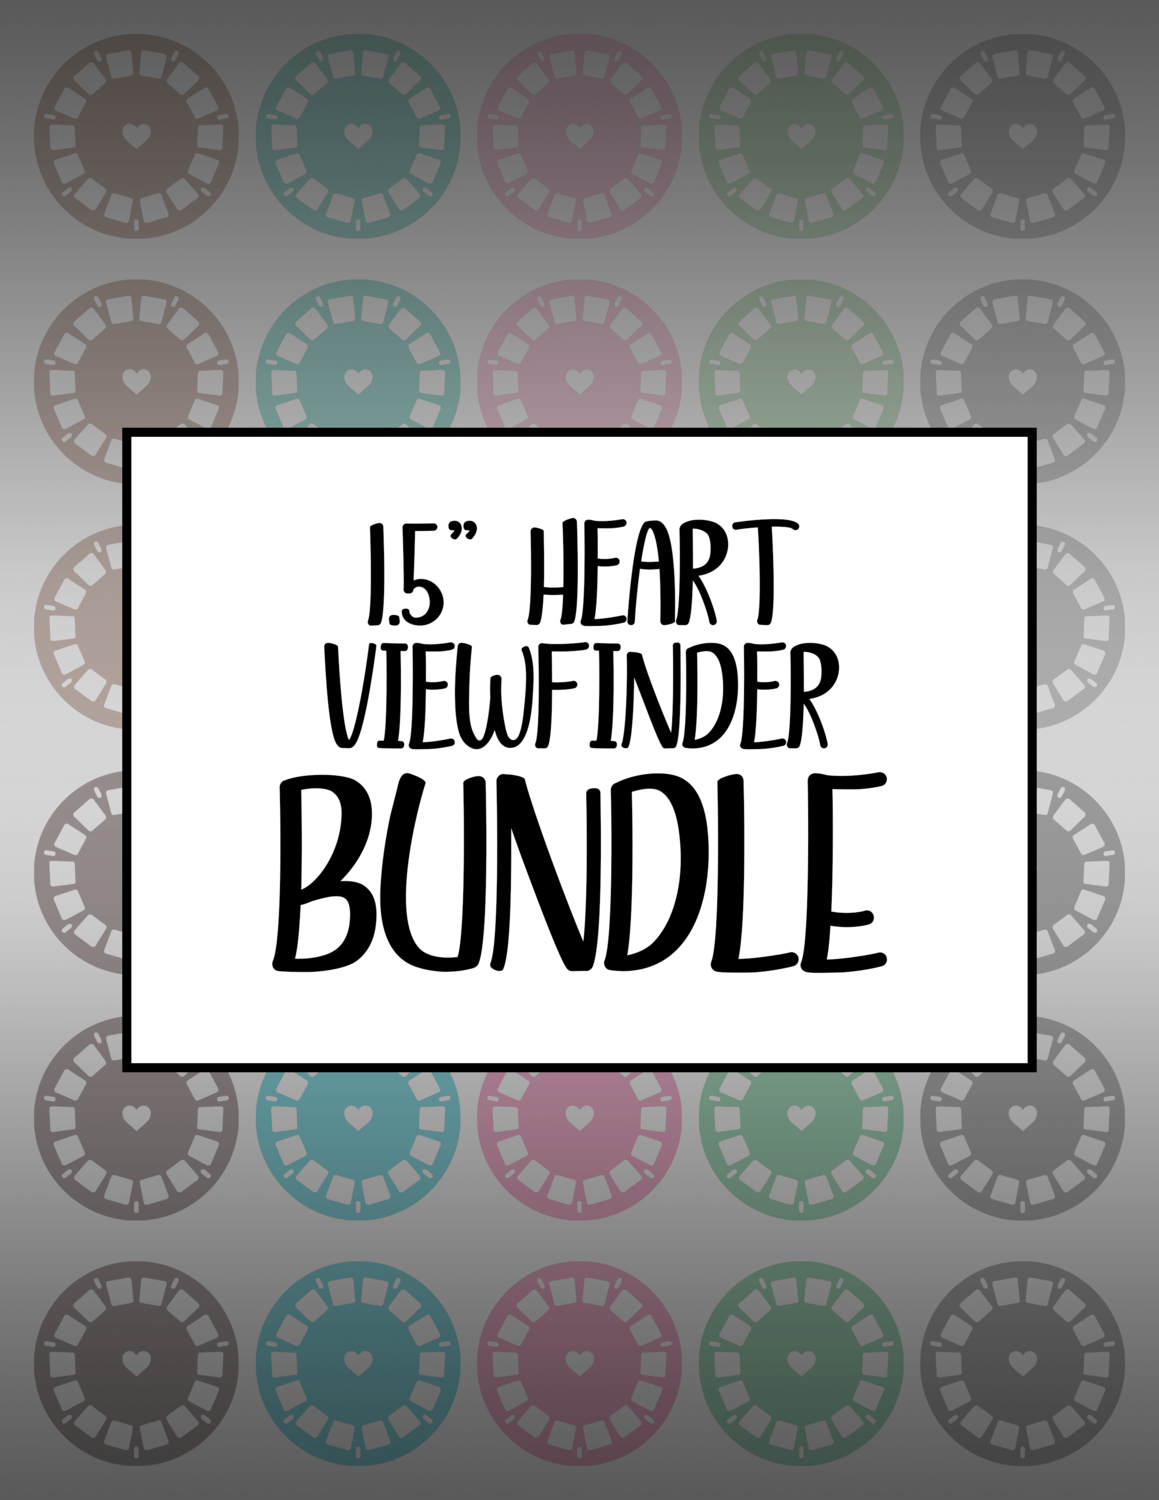 Bundle #3 Viewfinders 1.5" (with hearts)